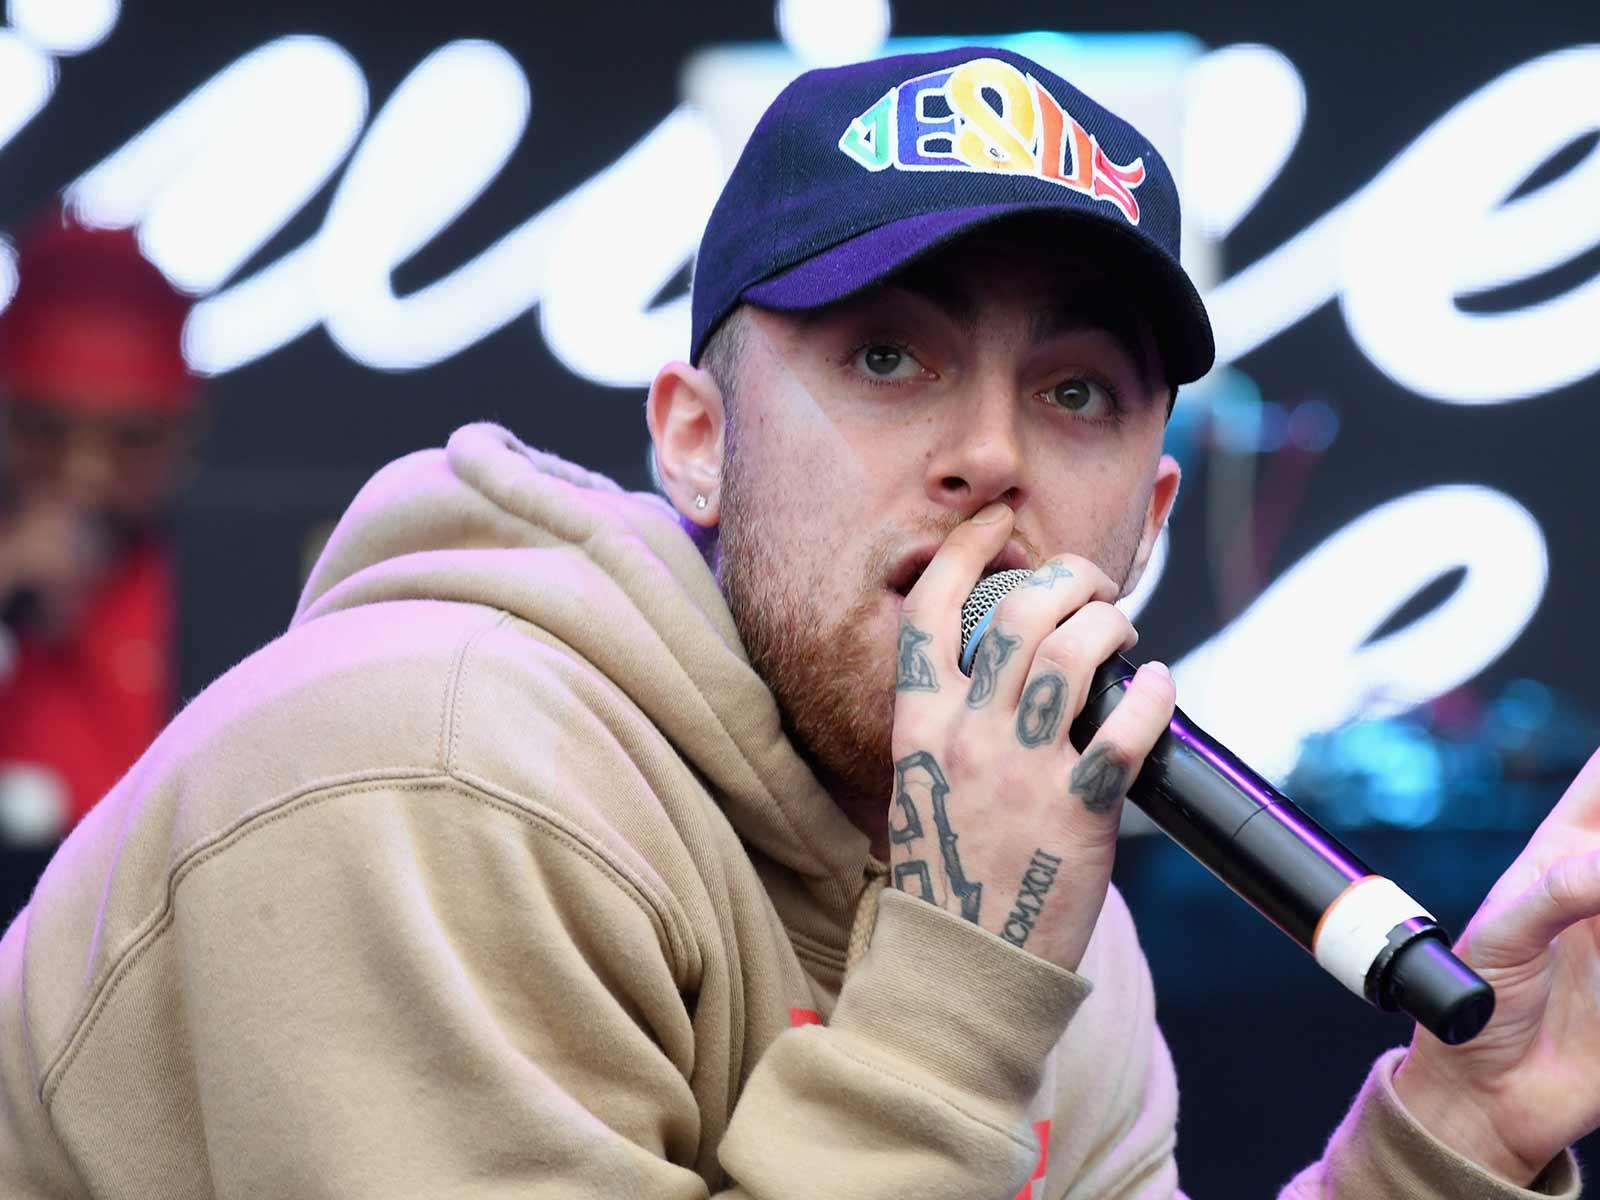 Mac Miller Autopsy Completed, Cause of Death ‘Deferred’ Pending Toxicology